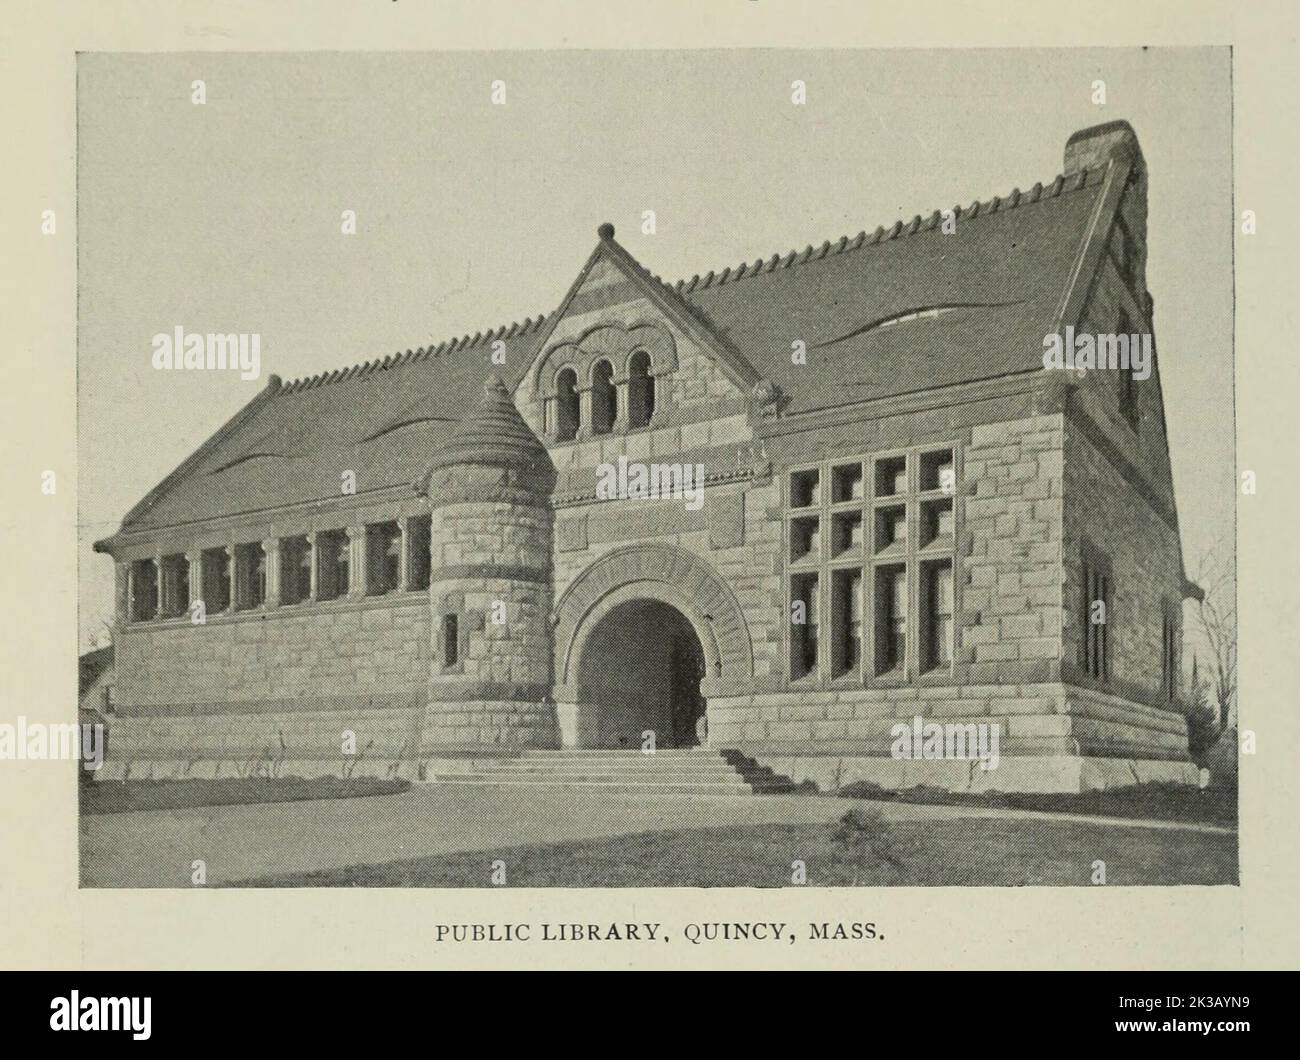 Public Library, Quincy, Mass from the Article THE ARCHITECTURE OF MUNICIPAL BUILDINGS. By E. C. Gardner from The Engineering Magazine DEVOTED TO INDUSTRIAL PROGRESS Volume VIII April to September, 1895 NEW YORK The Engineering Magazine Co Stock Photo